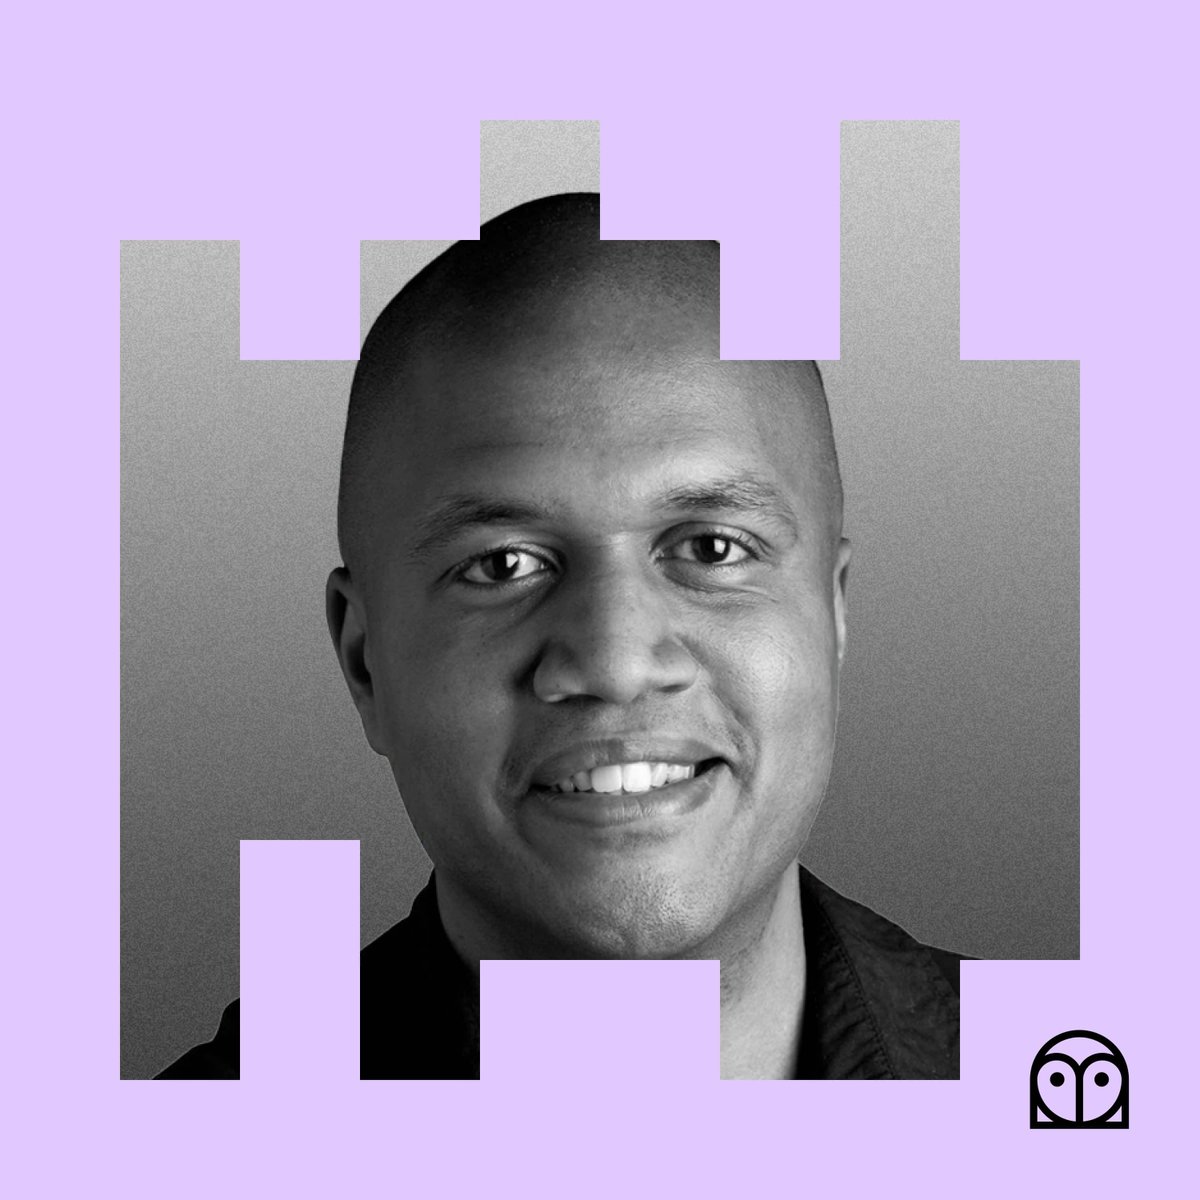 Not many people have transformed from nuclear engineer to Air Jordan designer for @Nike but @kevinbethune has. Hear what he learned and why his book Reimagining Design is a best-seller on the Design Better #podcast. thecuriositydepartment.substack.com/p/kevin-bethun…